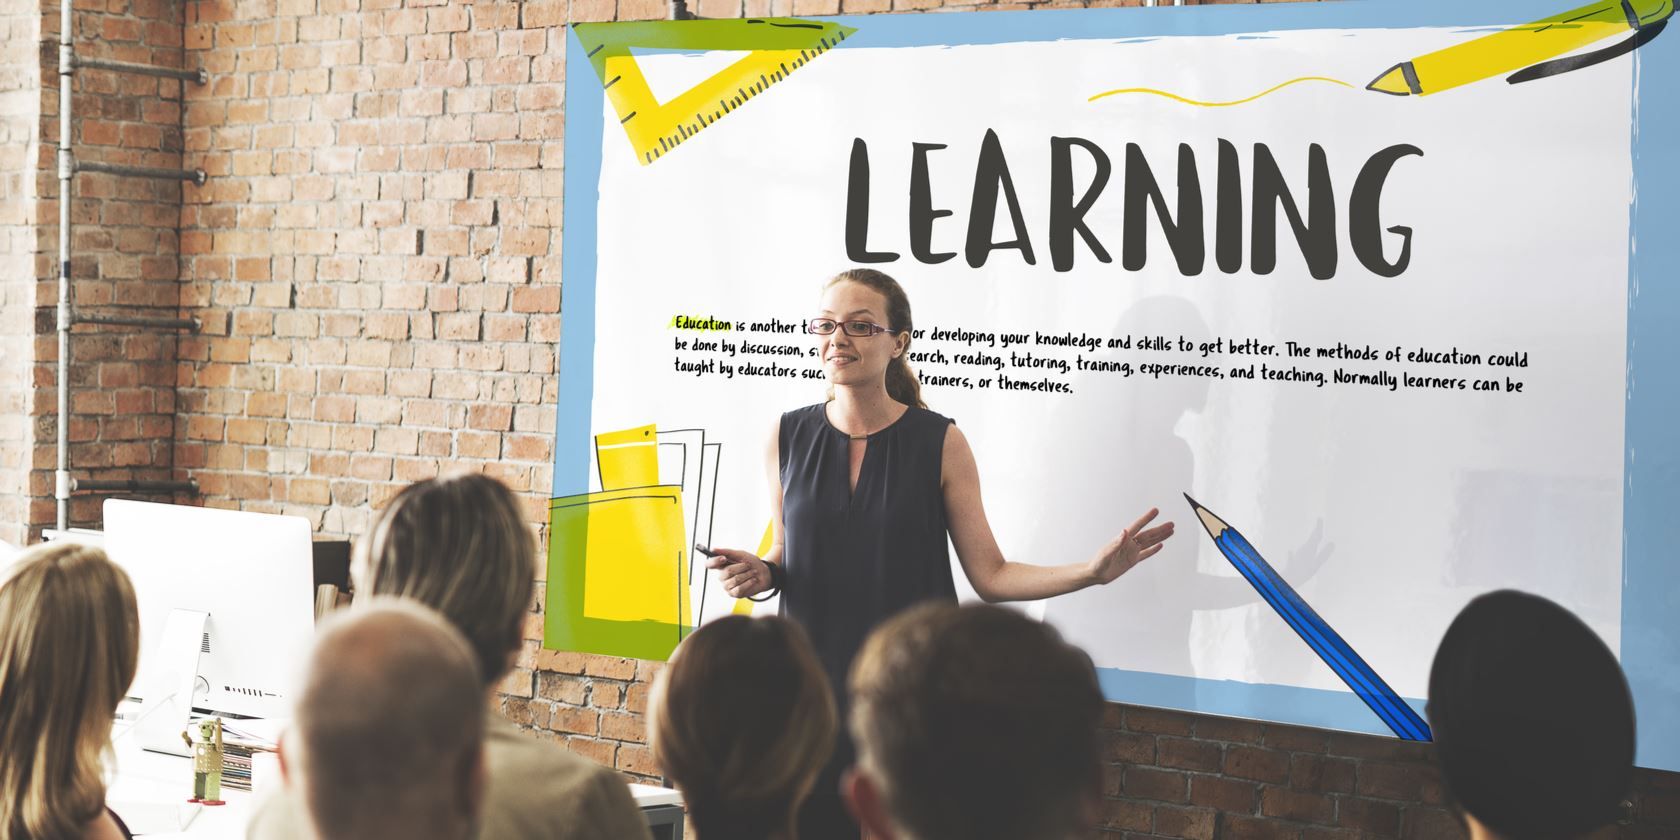 The Best Powerpoint Templates For Educational Presentations